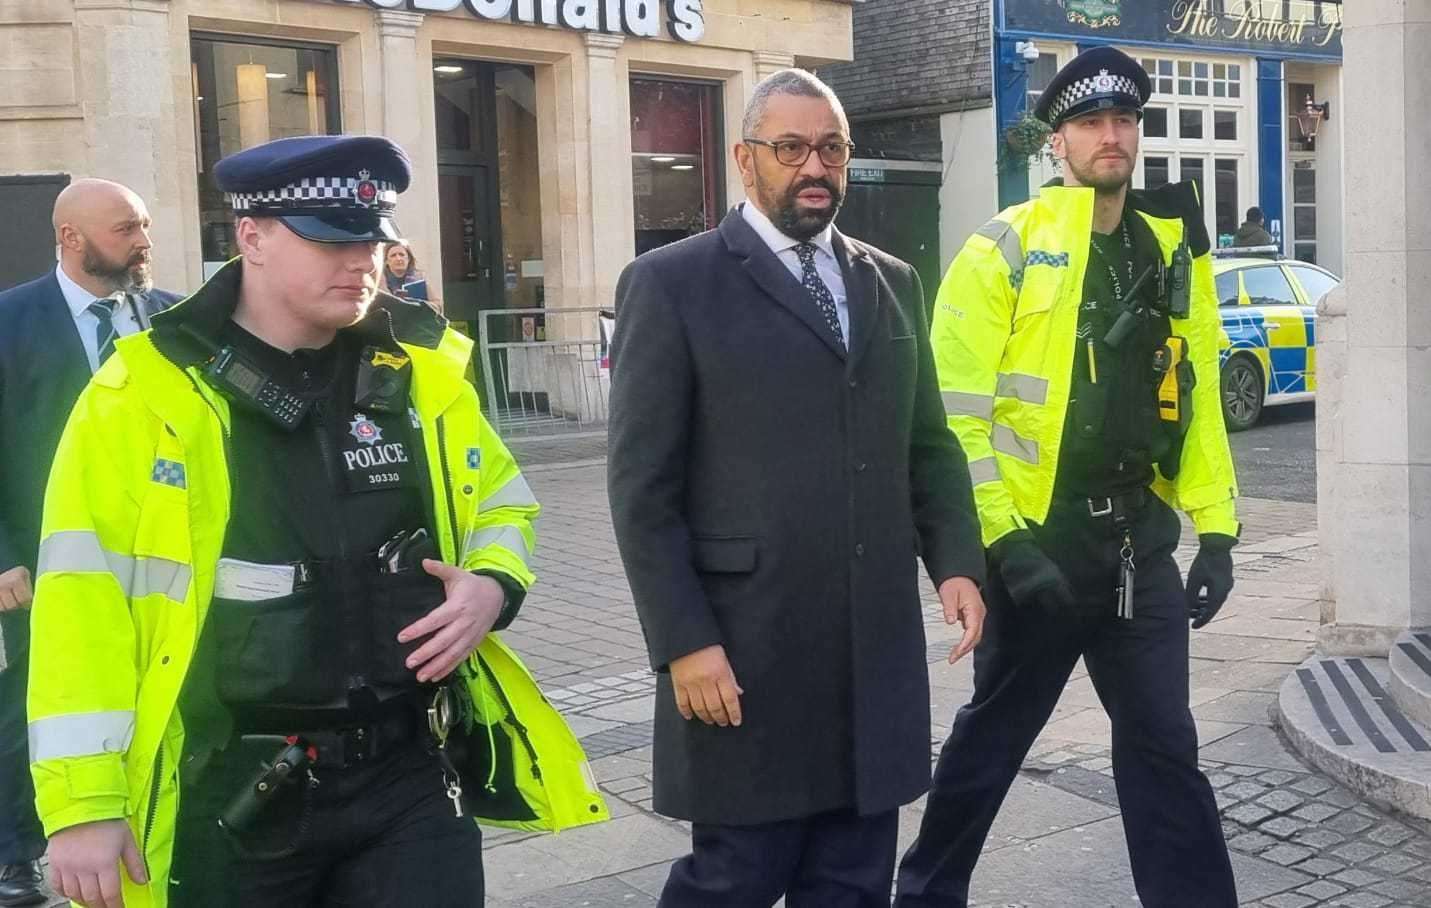 Home Secretary James Cleverly MP outside McDonald’s in Gravesend on Wednesday